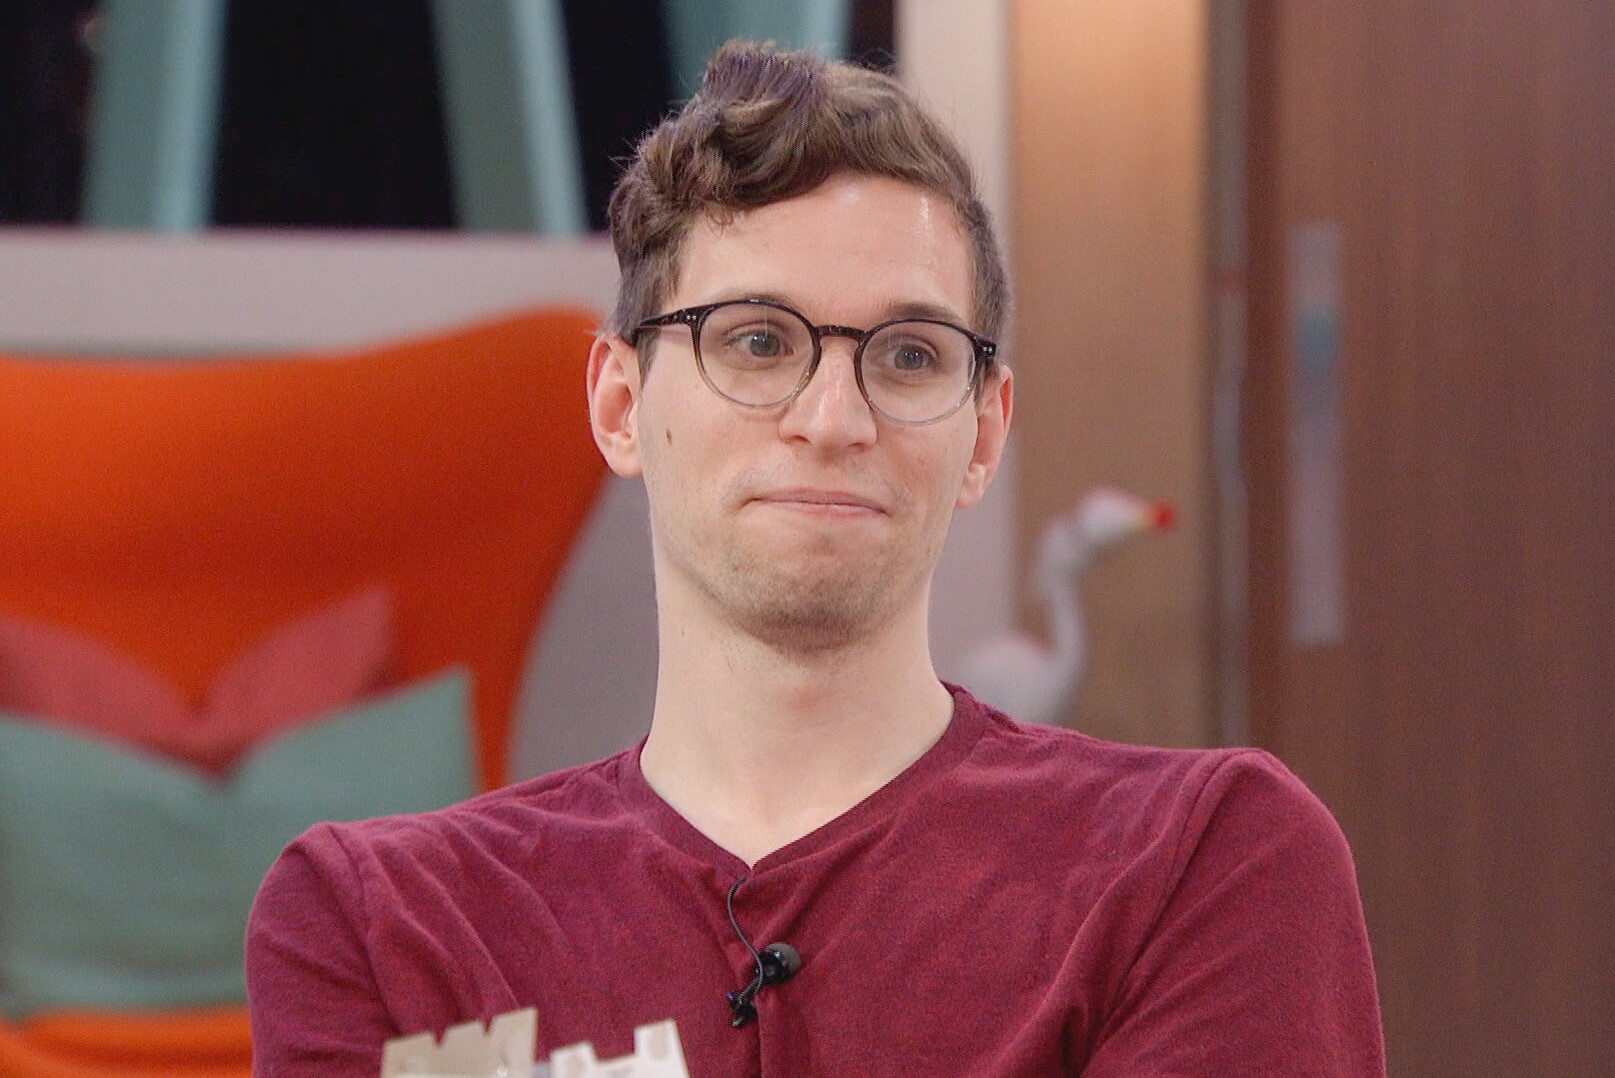 Michael Bruner, who is in danger of leaving during the 'Big Brother 24' double eviction, wears a maroon shirt and glasses.